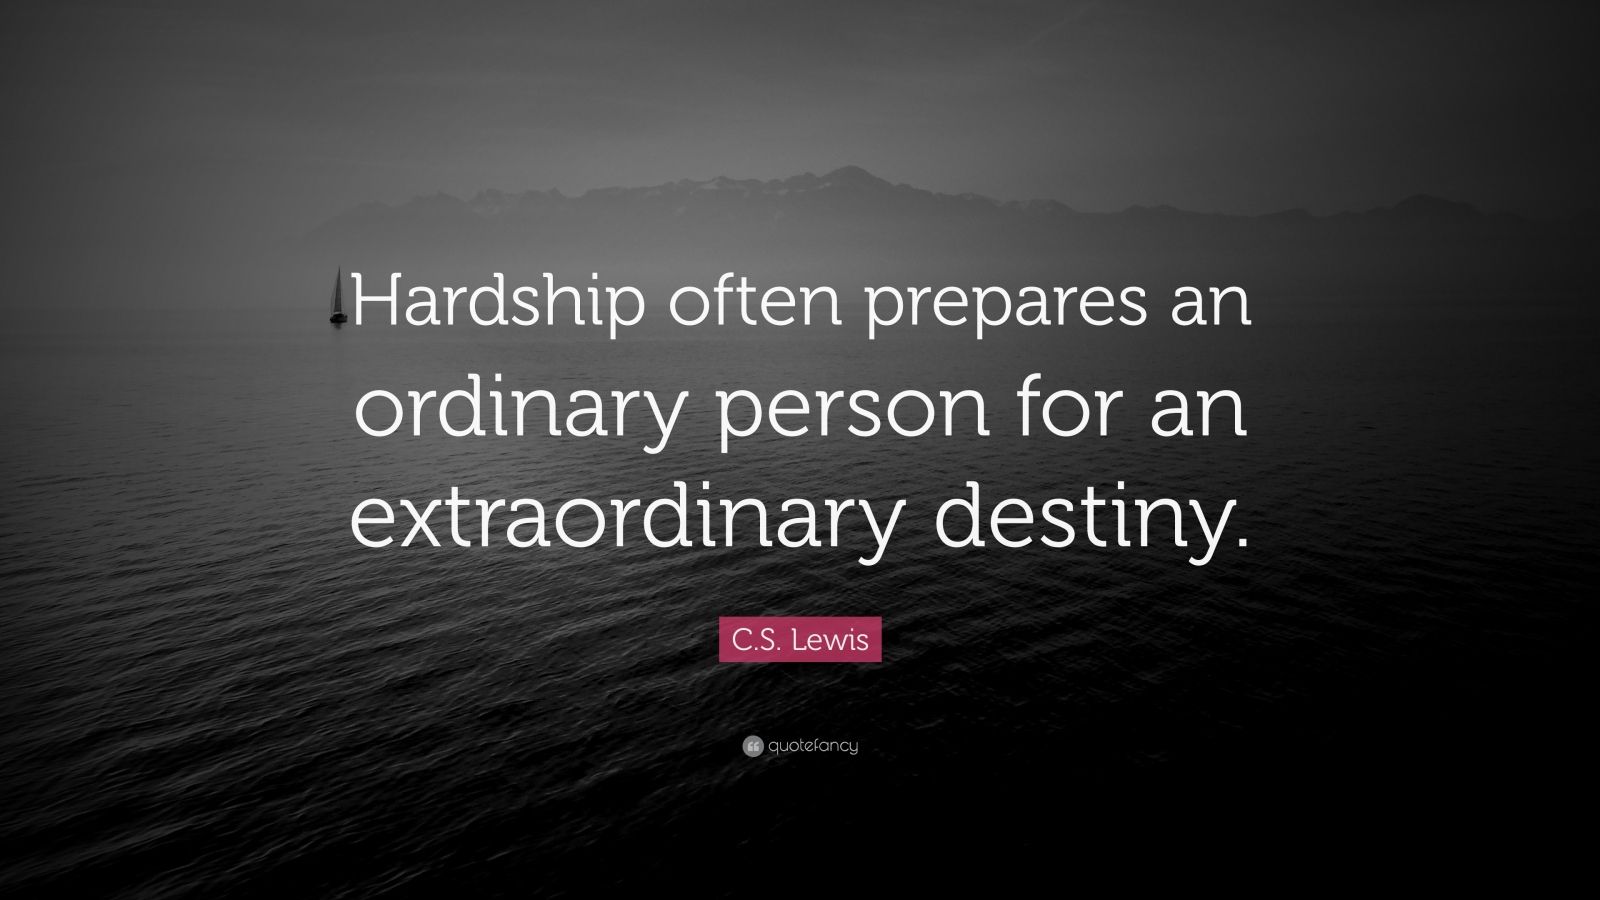 C. S. Lewis Quote: “Hardship often prepares an ordinary person for an ...